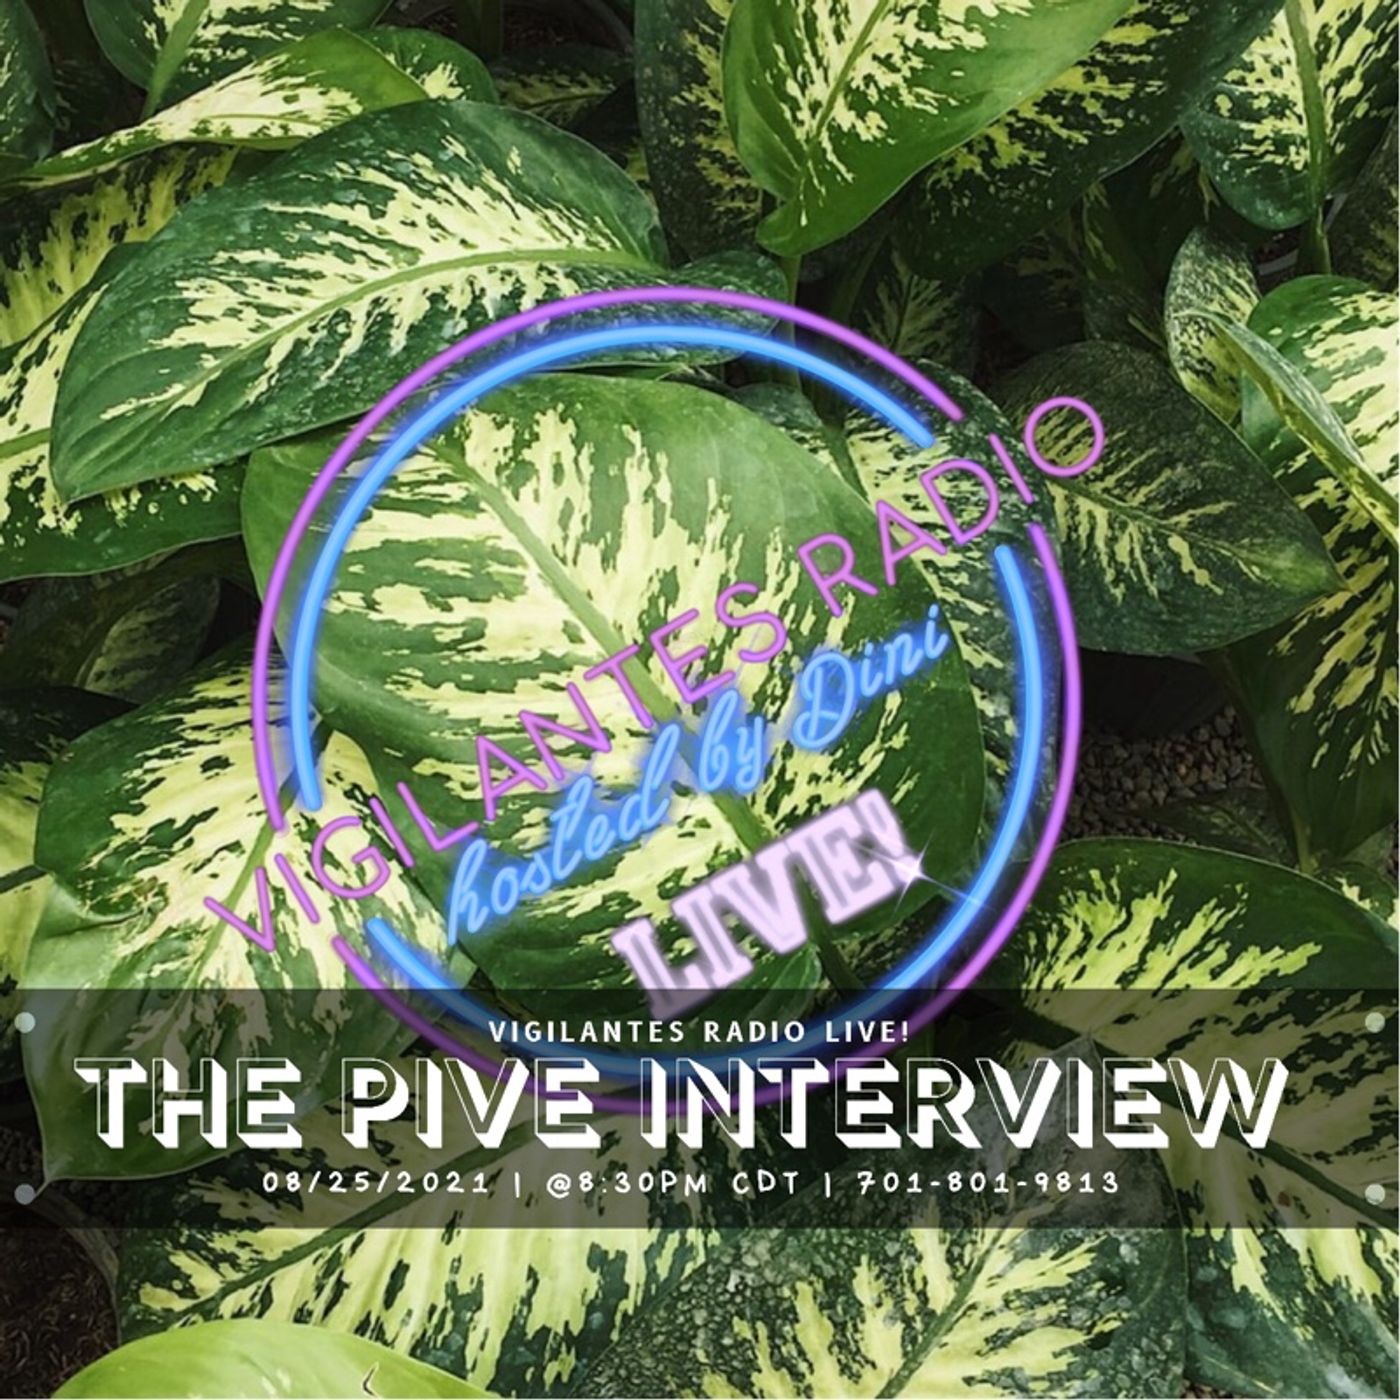 The PIVE Interview. Image